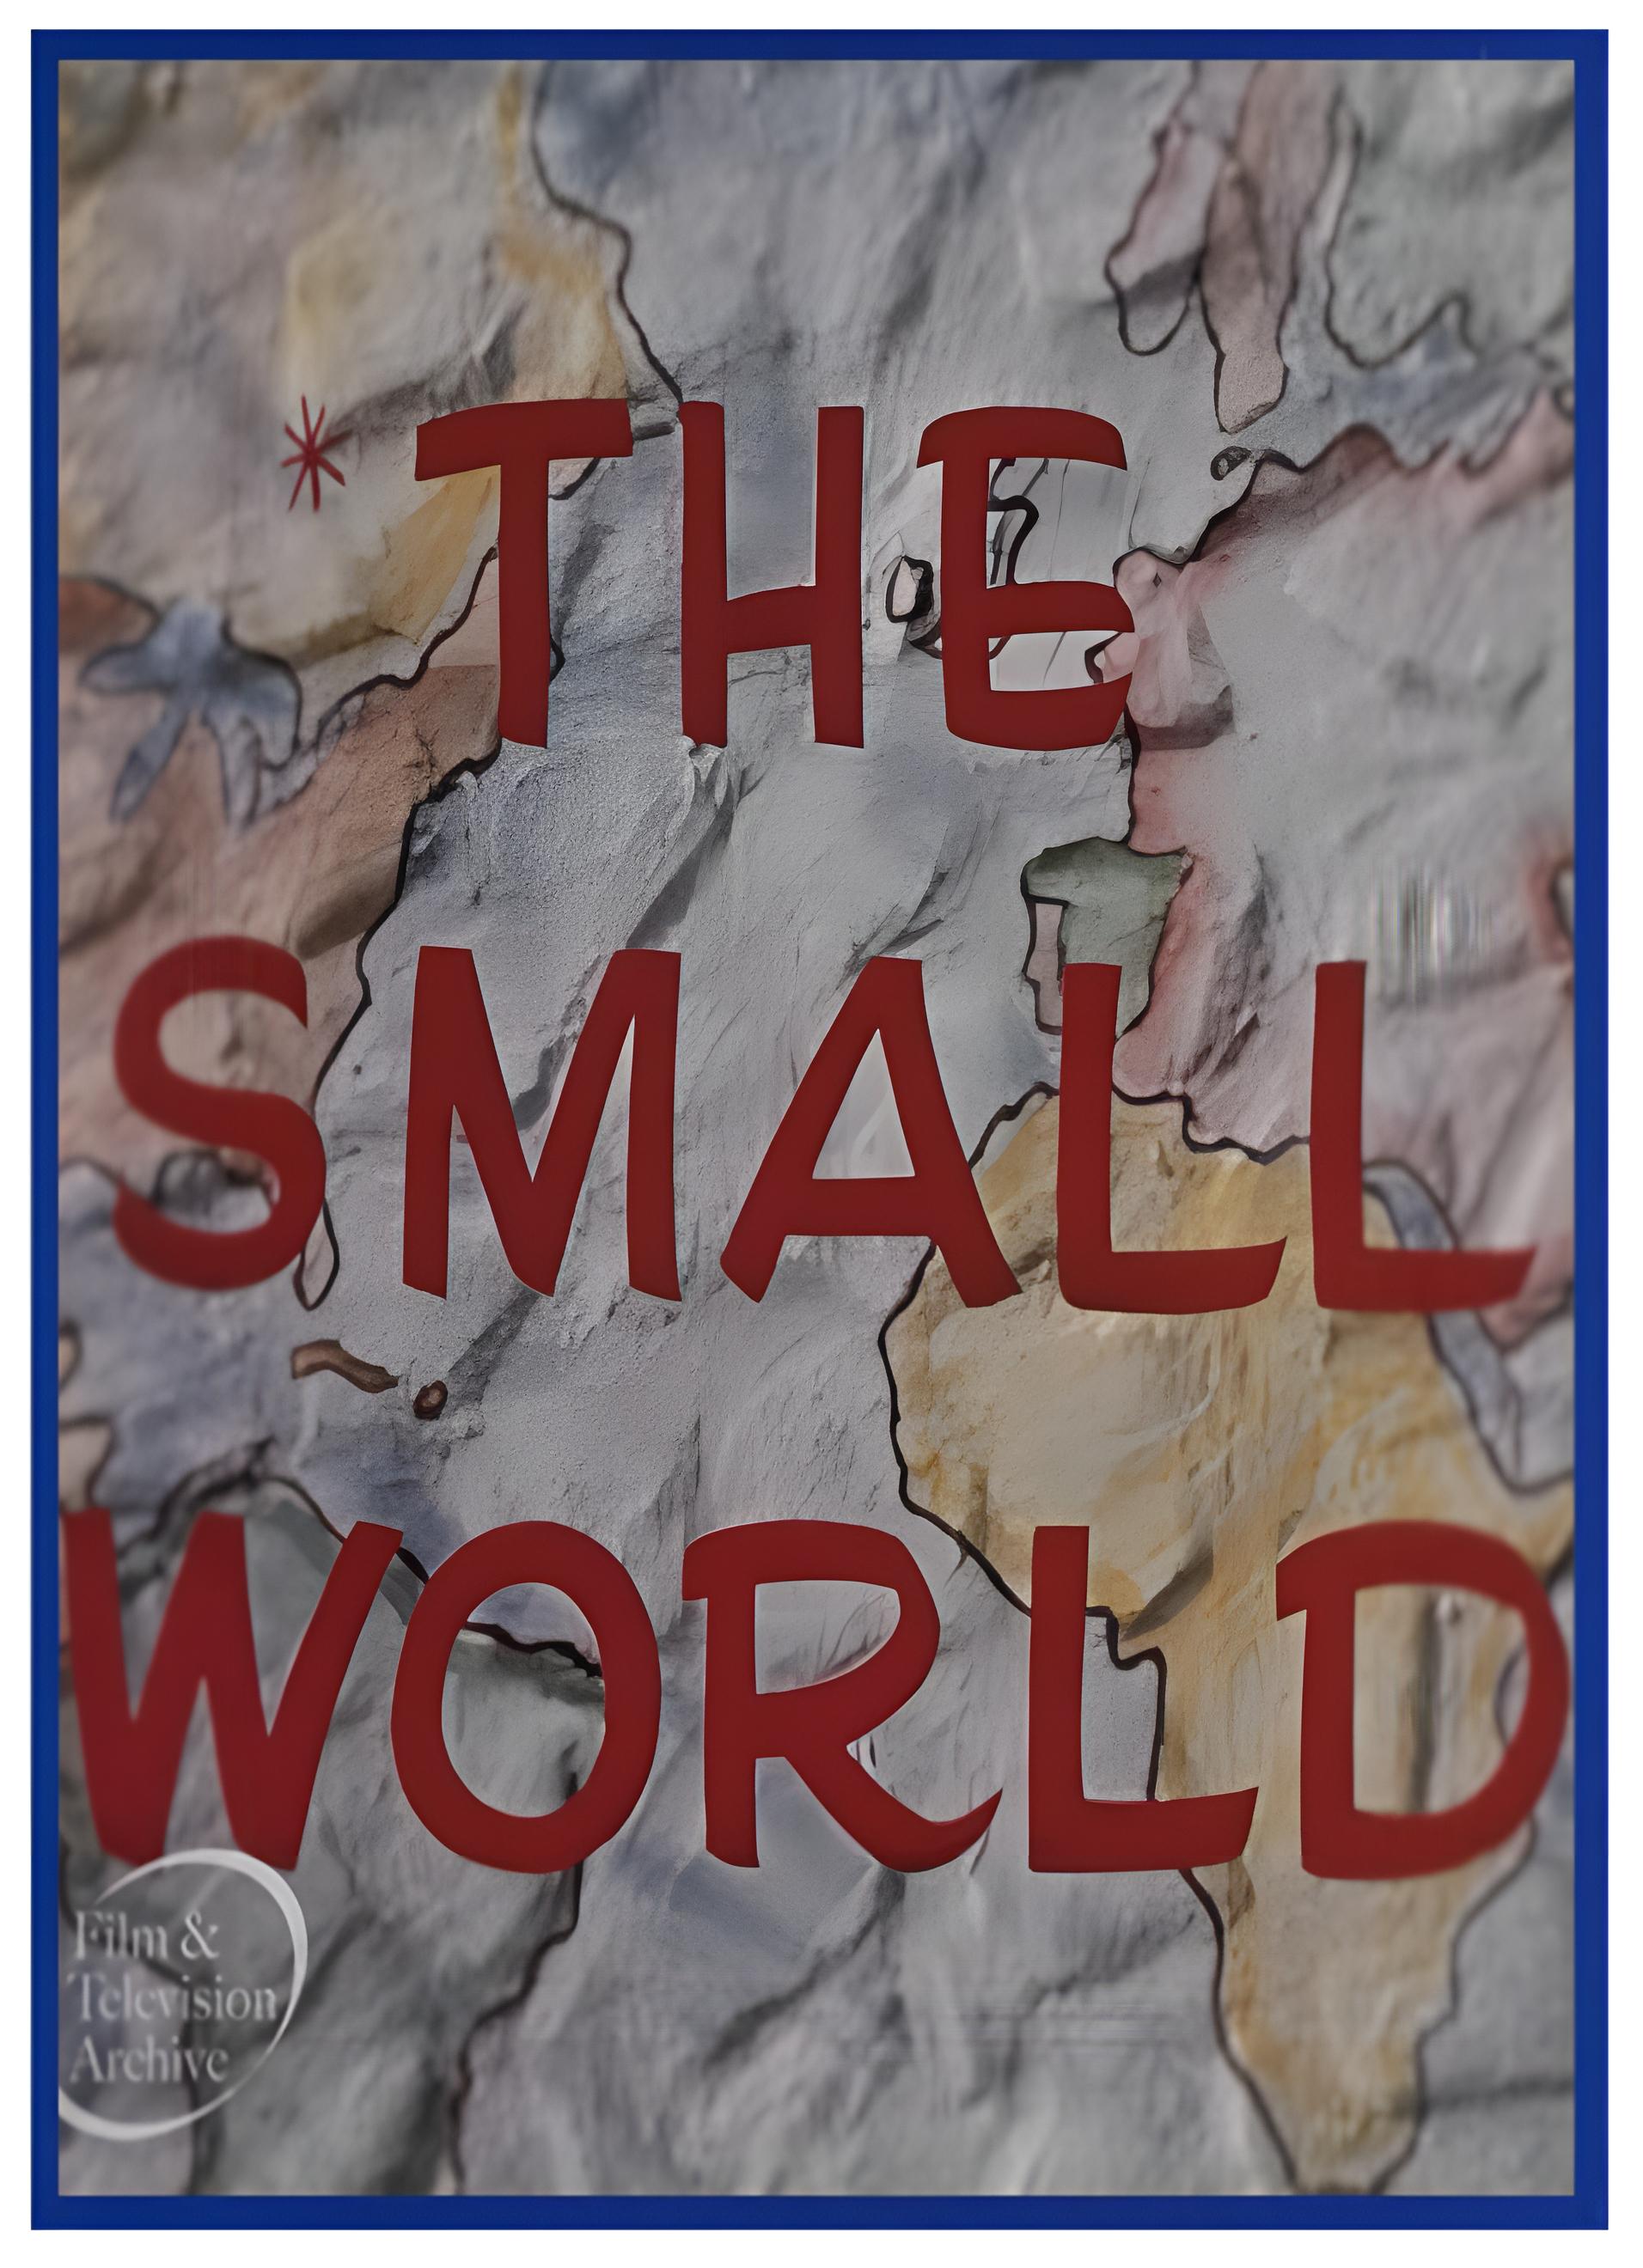 The Small World (1963)